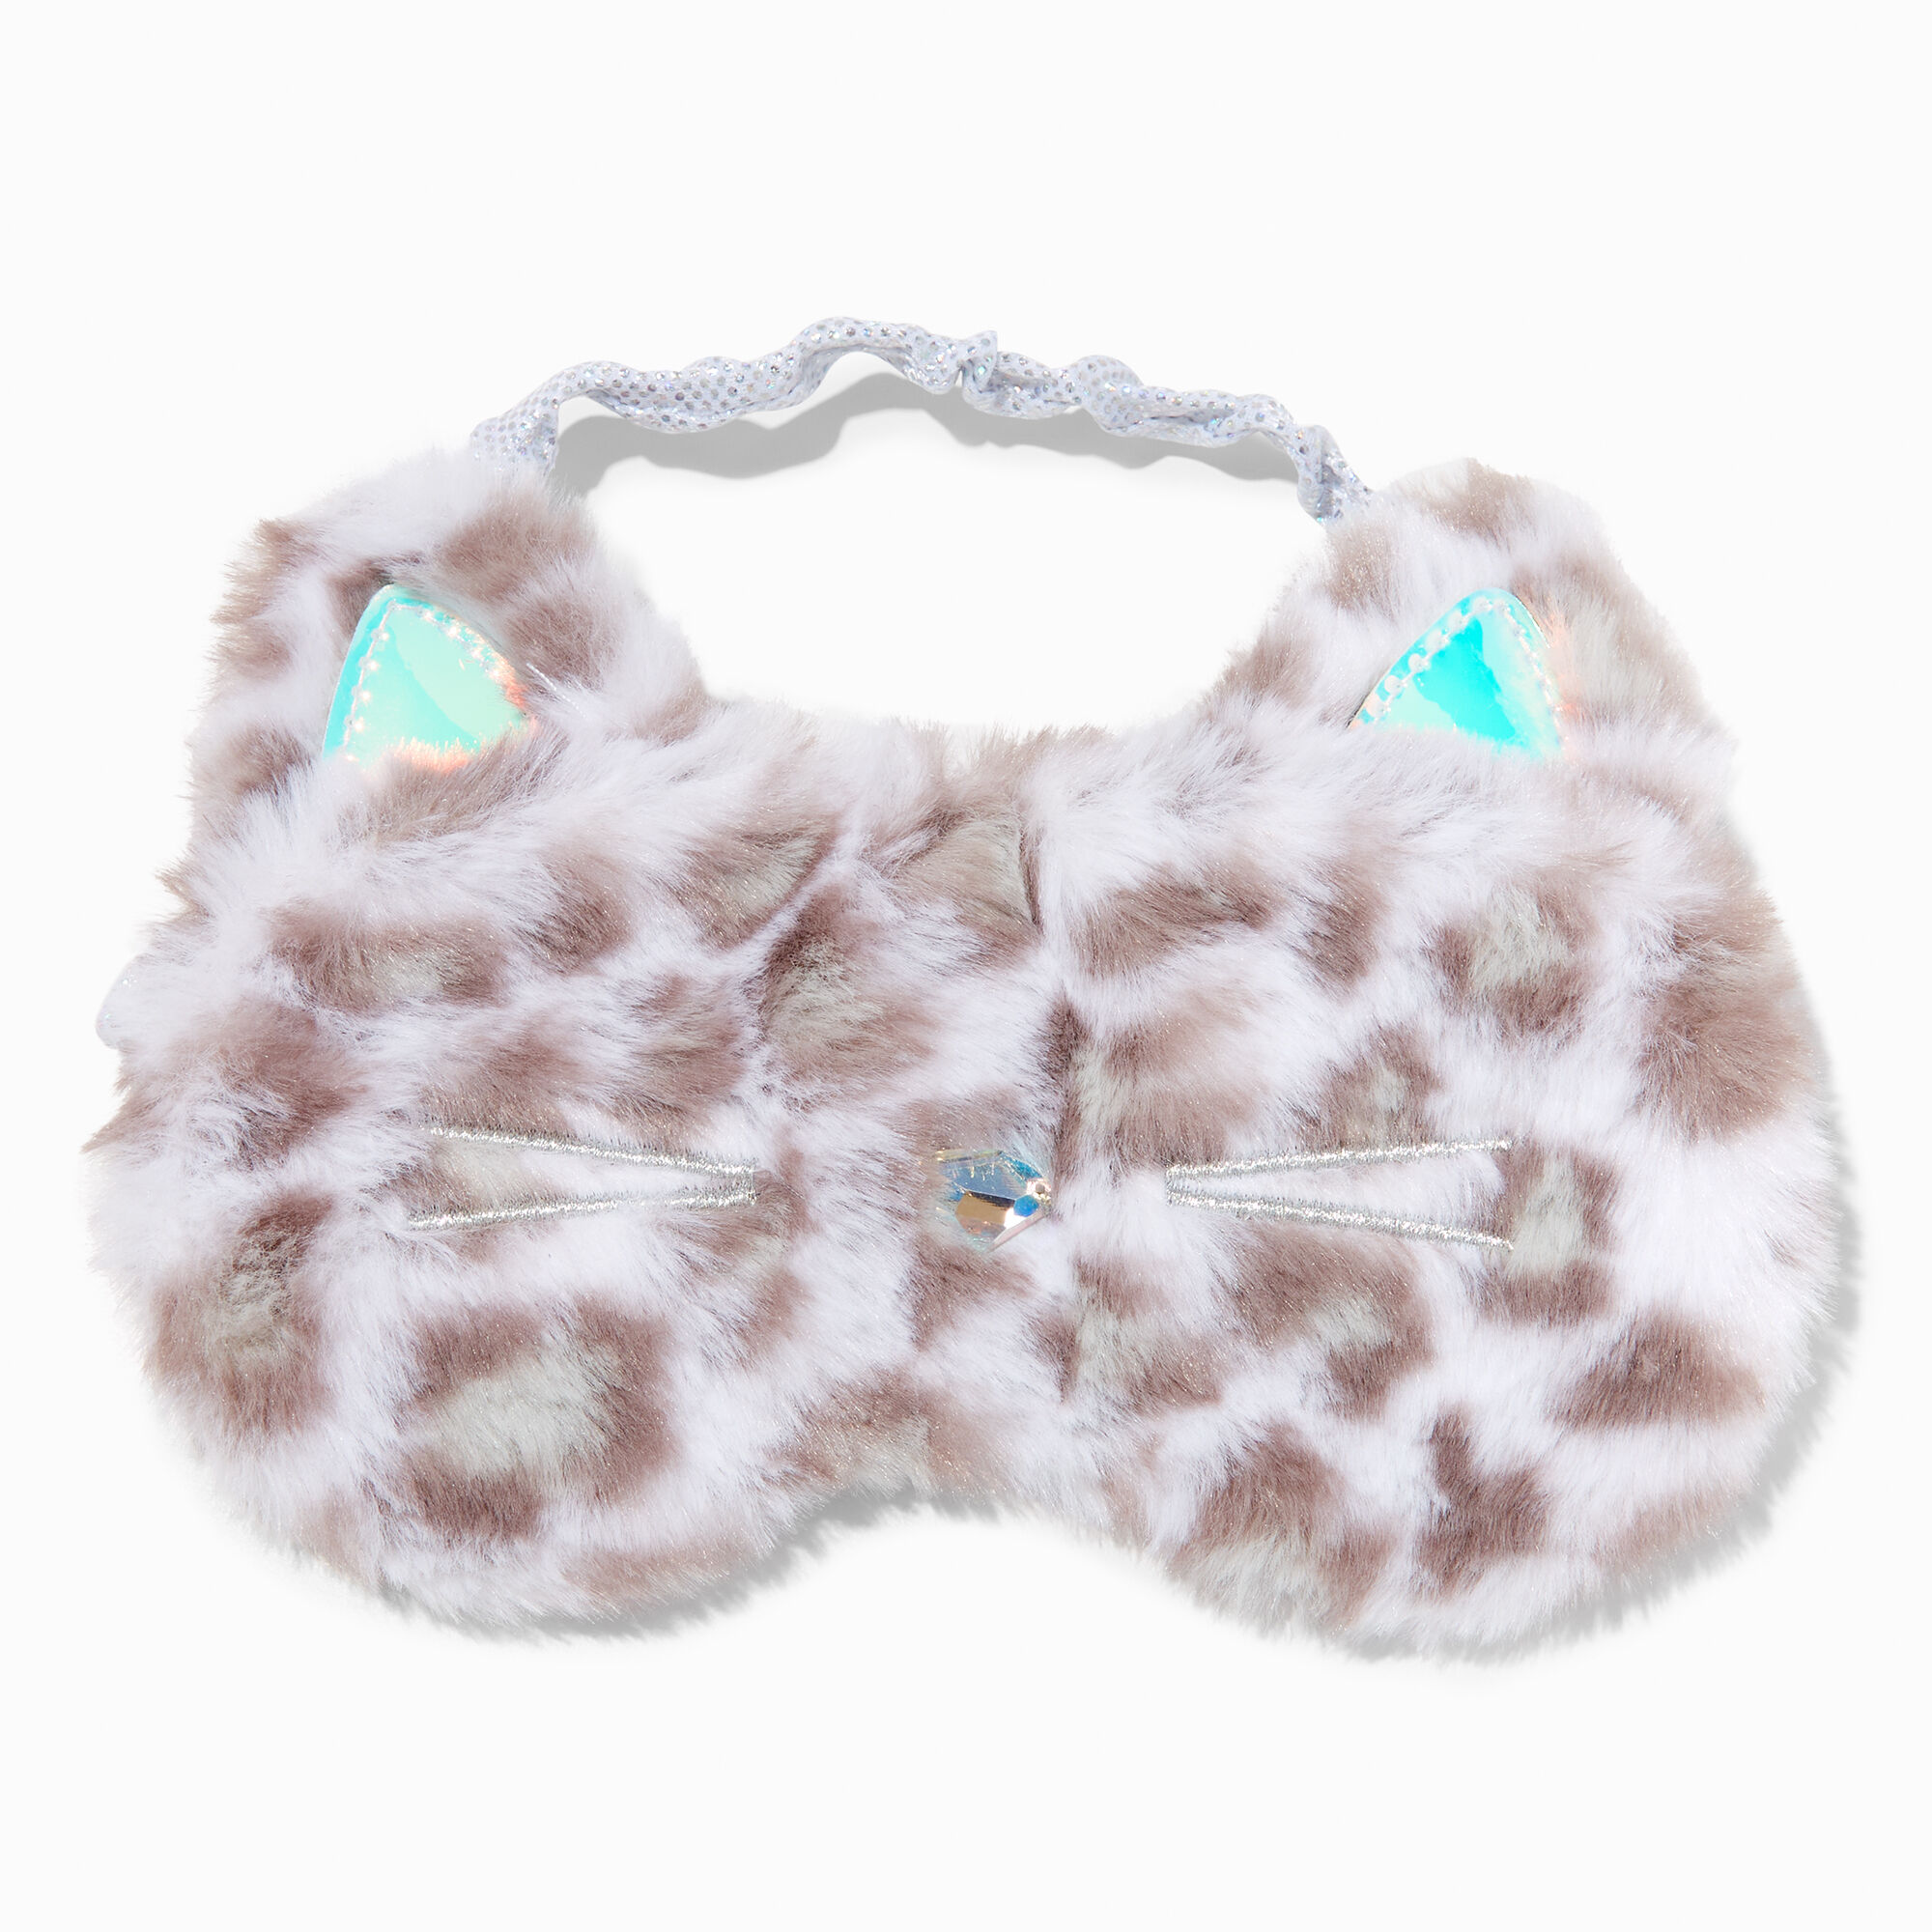 View Claires Club Snow Leopard Sleeping Mask information